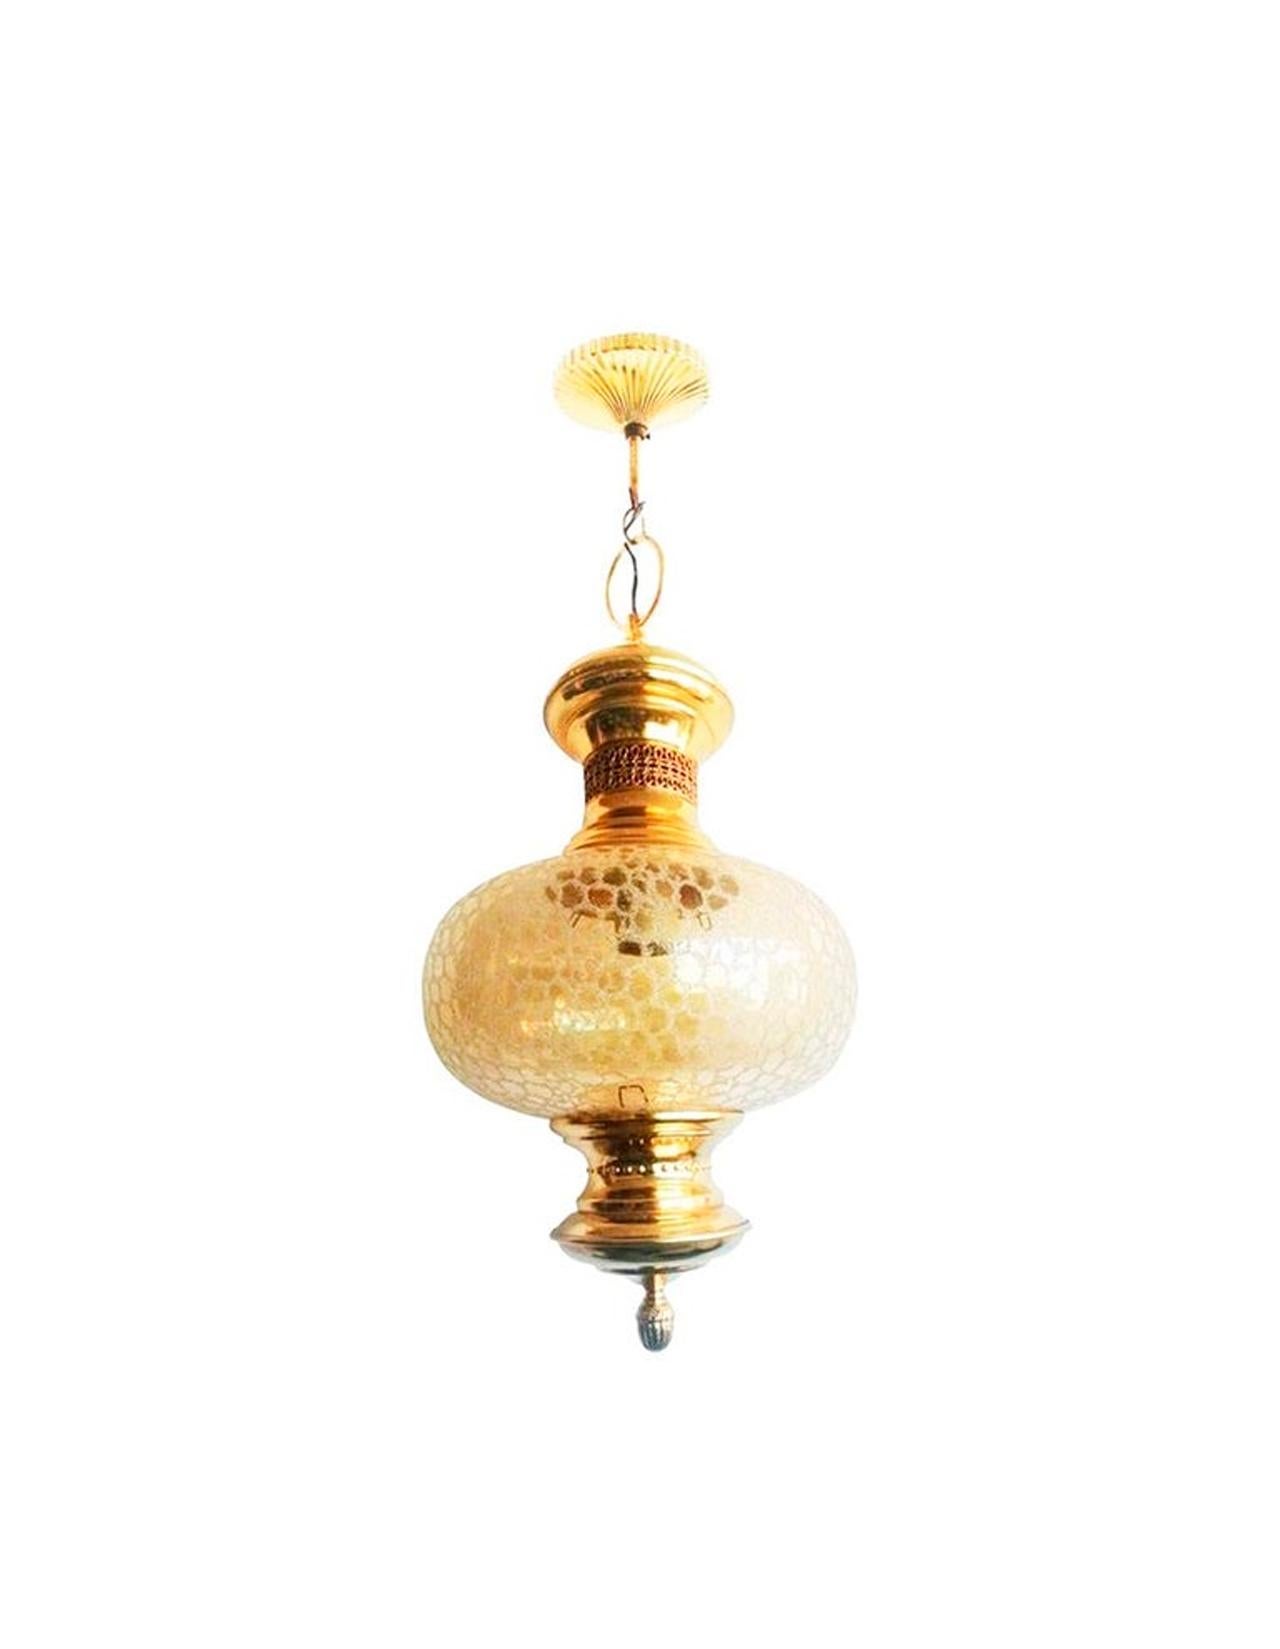 Golden Lamps Lanterns or Pendant  Gold  Brass and Glass, Spain Mid 20th Century In Excellent Condition For Sale In Mombuey, Zamora